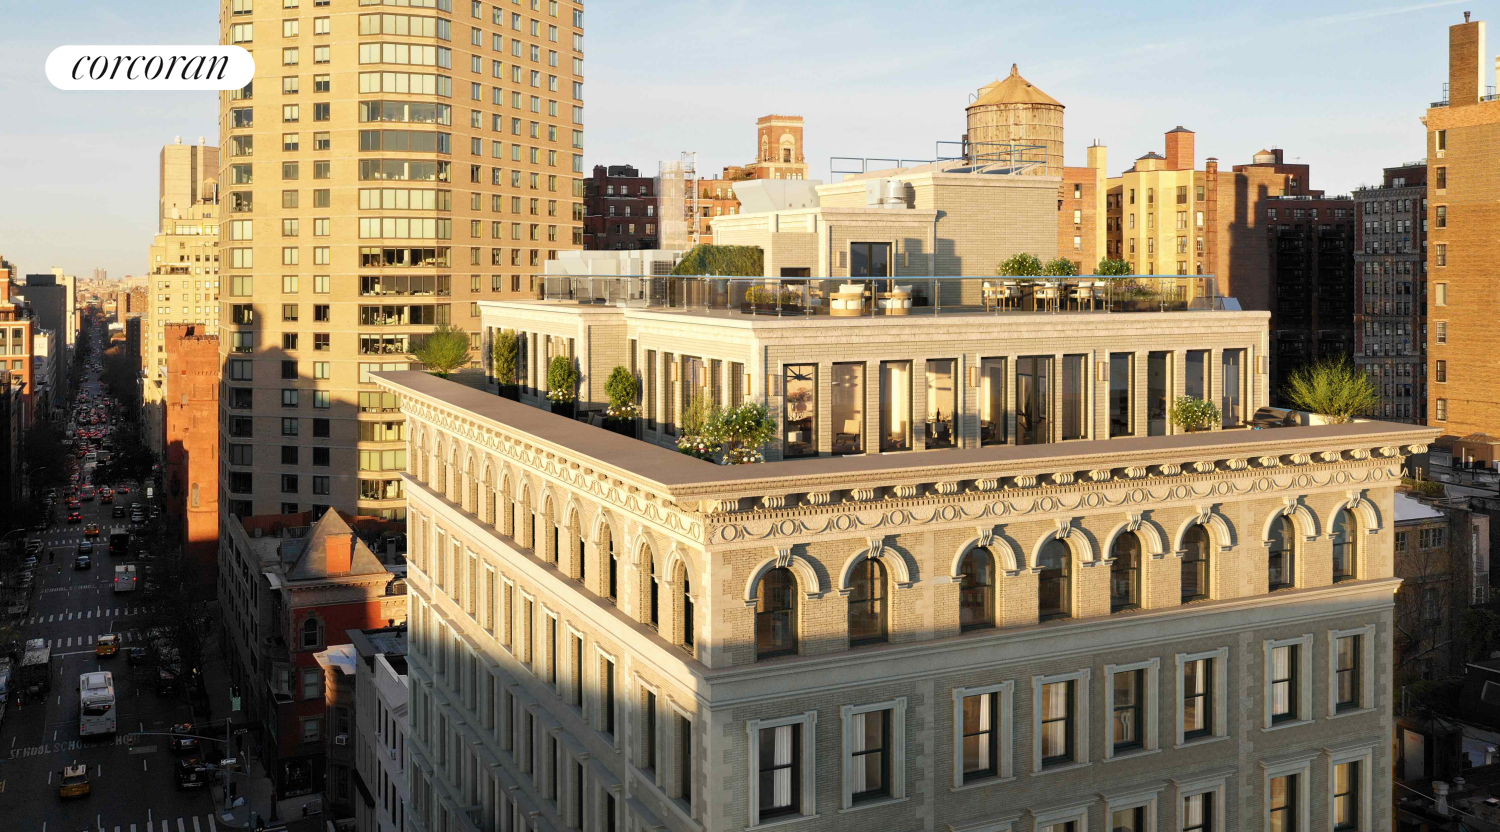 1295 Madison Avenue Penthouse, Carnegie Hill, Upper East Side, NYC - 5 Bedrooms  
5.5 Bathrooms  
10 Rooms - 